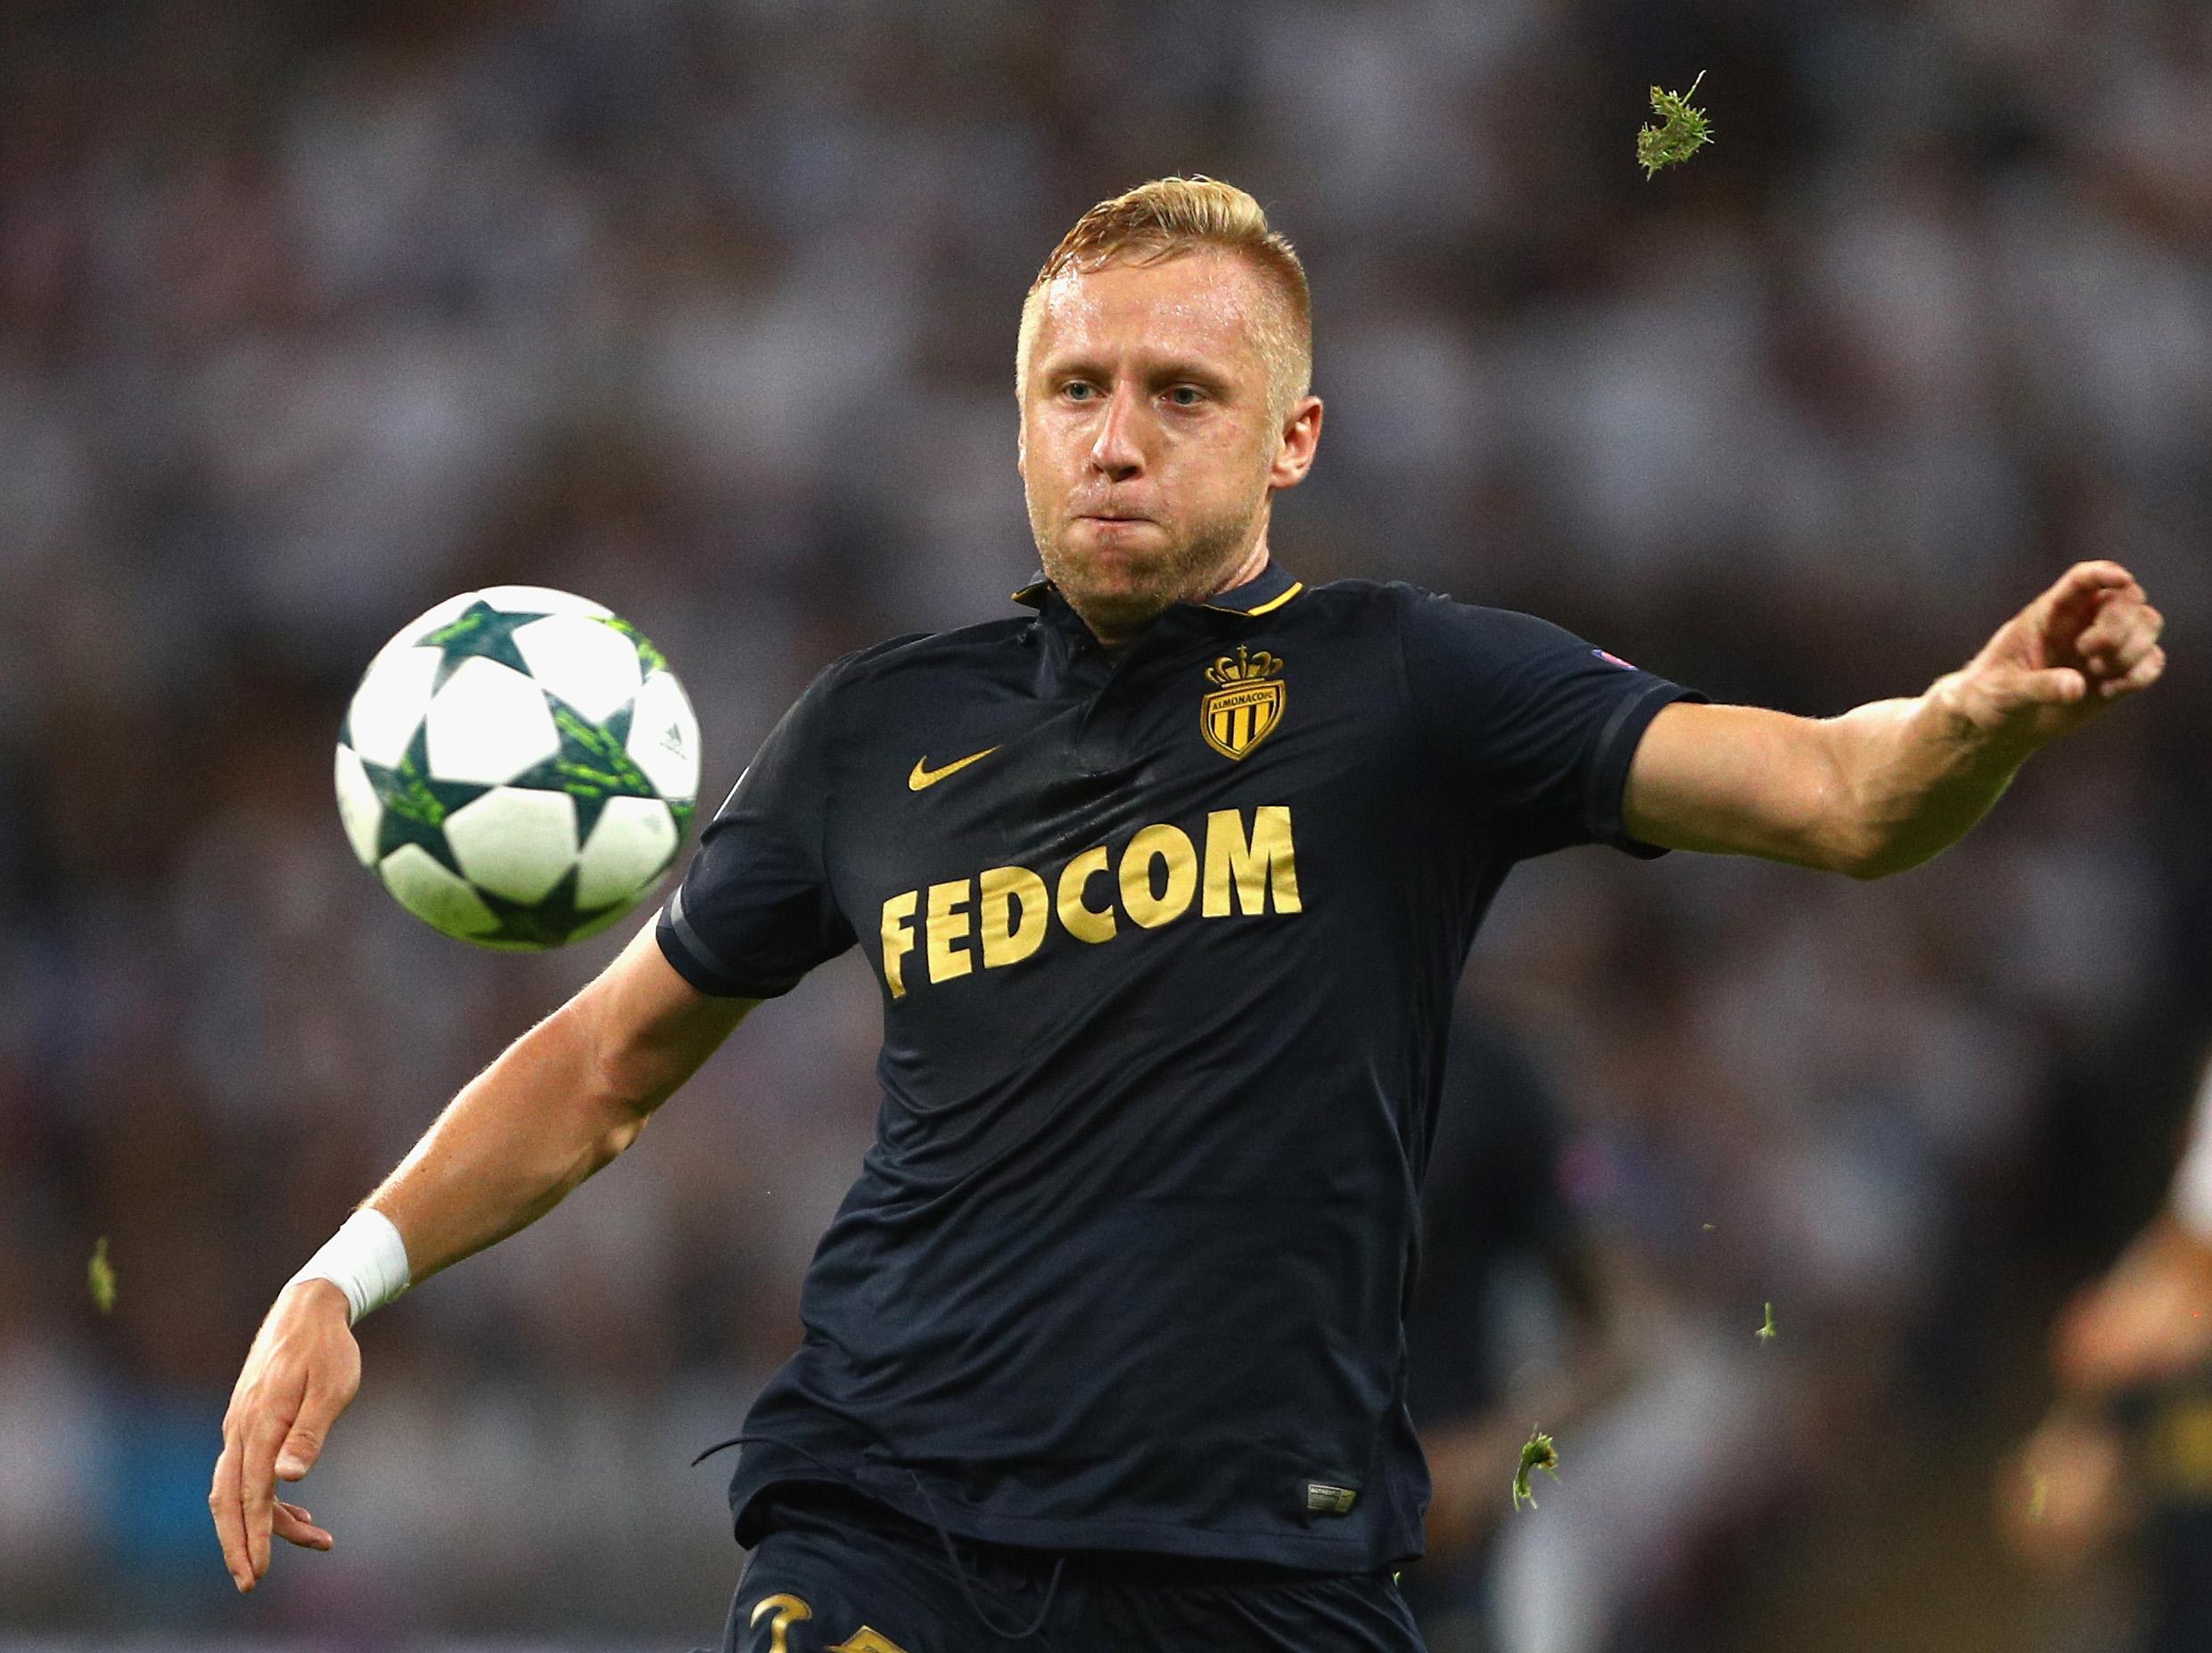 The Monaco defender's World Cup is now in doubt